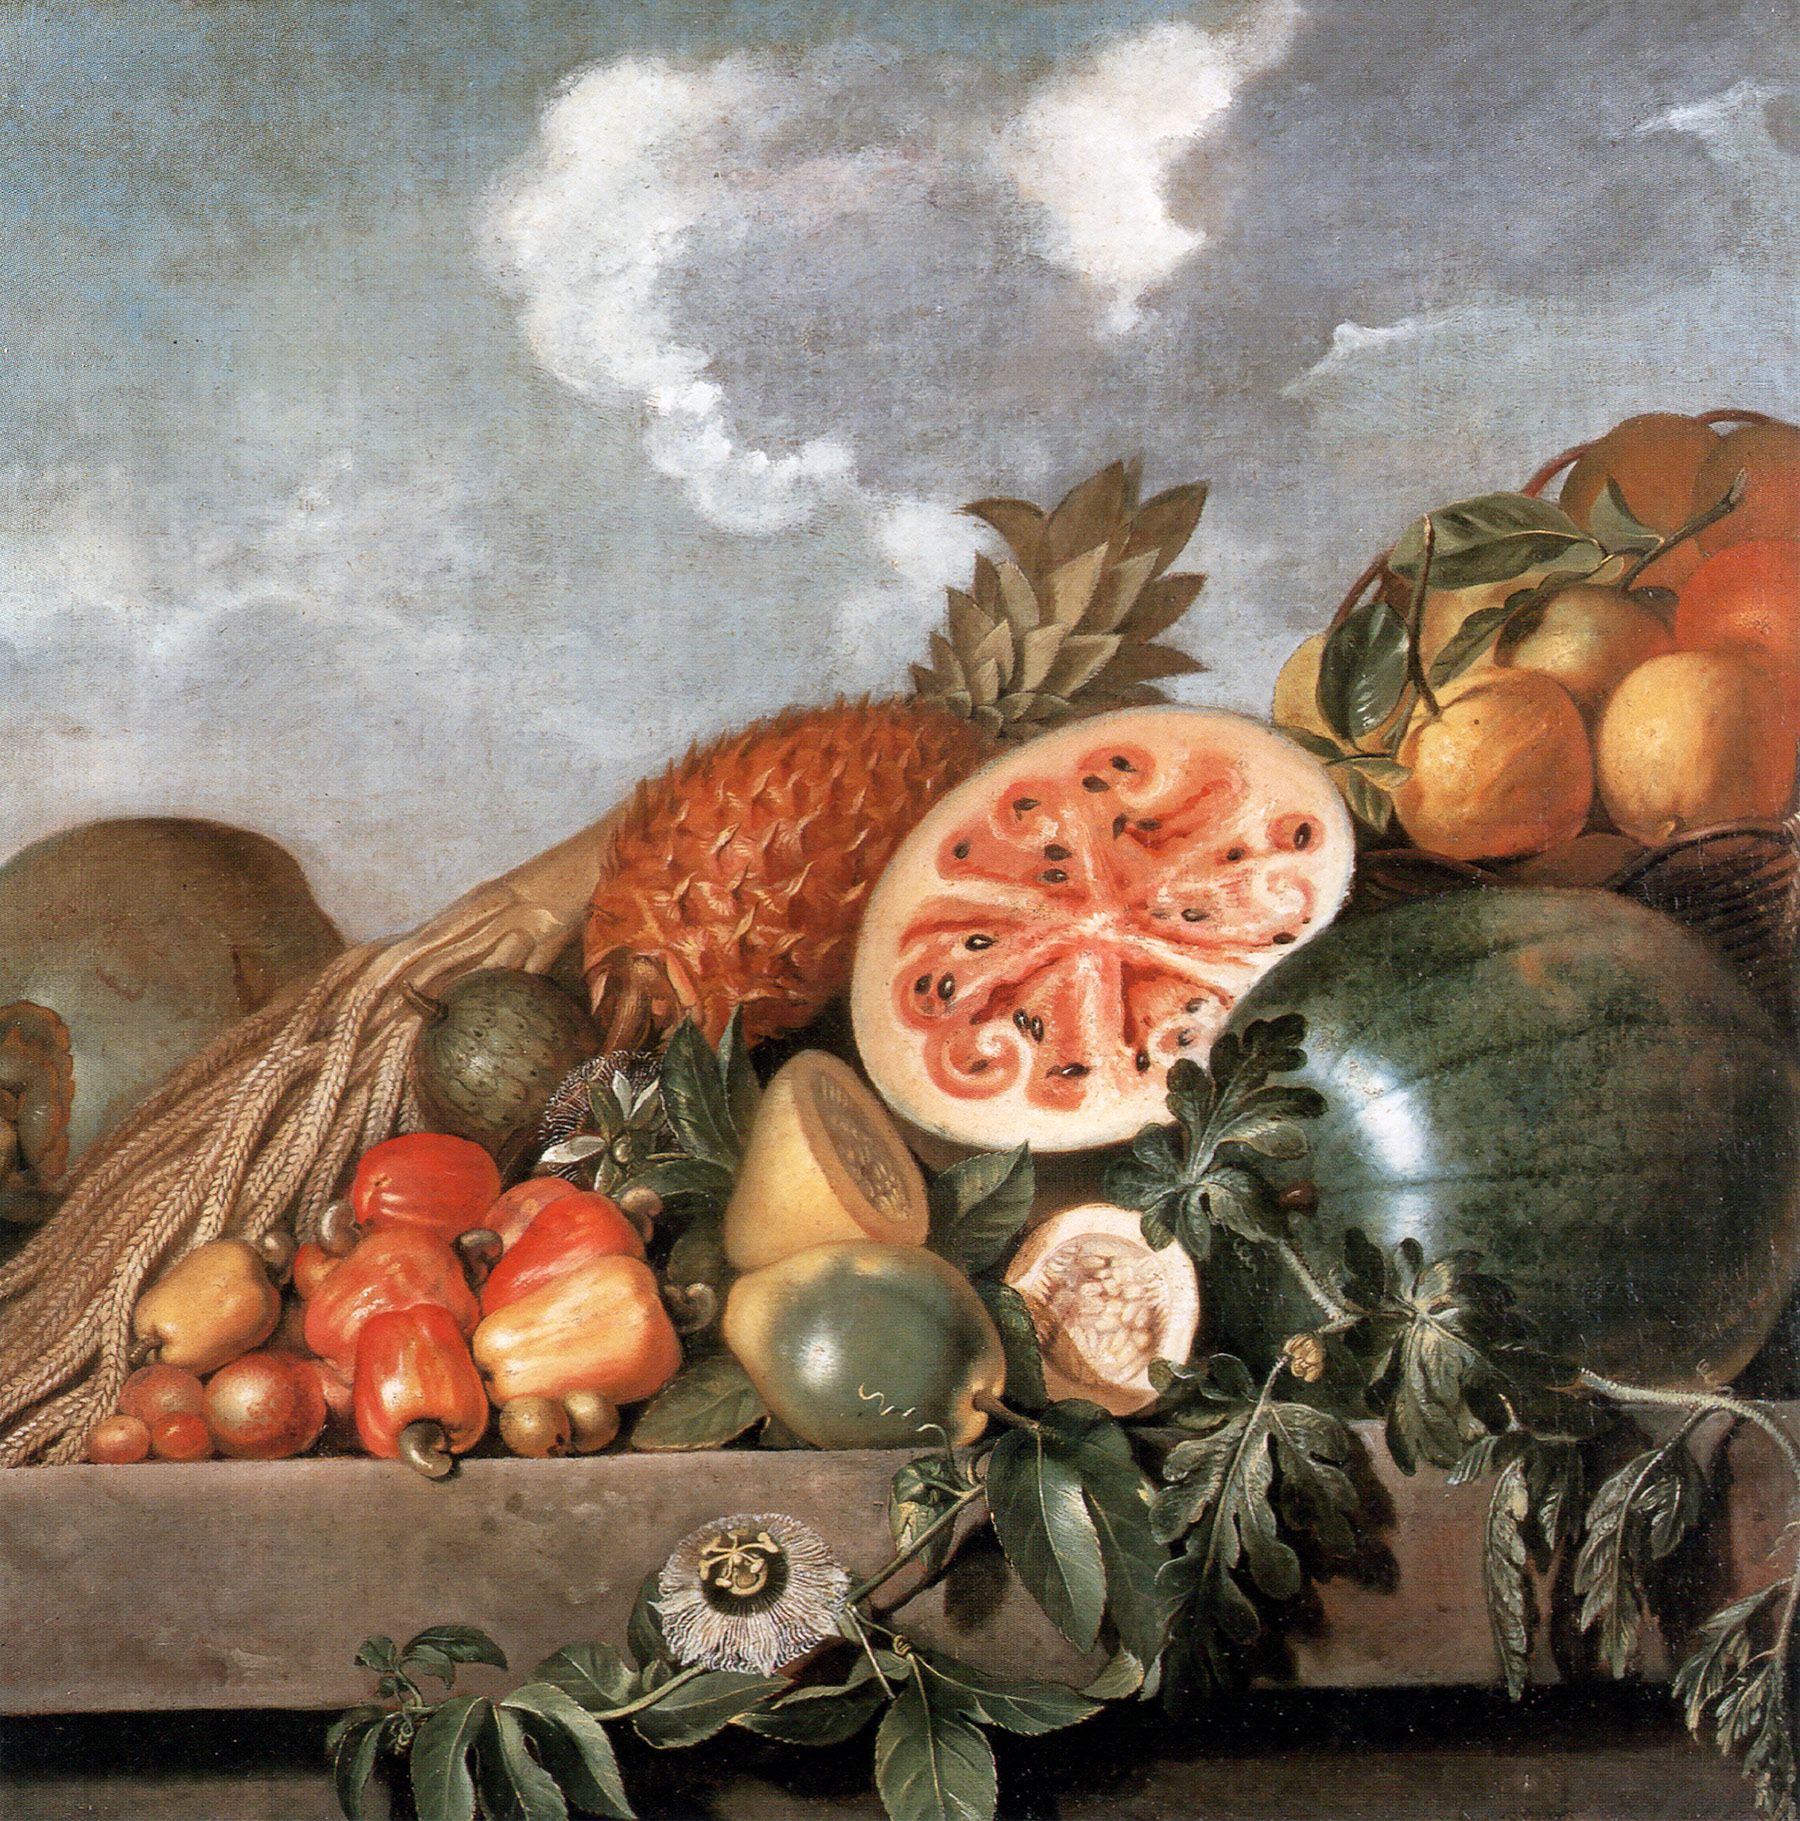 A vibrant Golden Age painting of fruits and vegetables elegantly adorning a table.